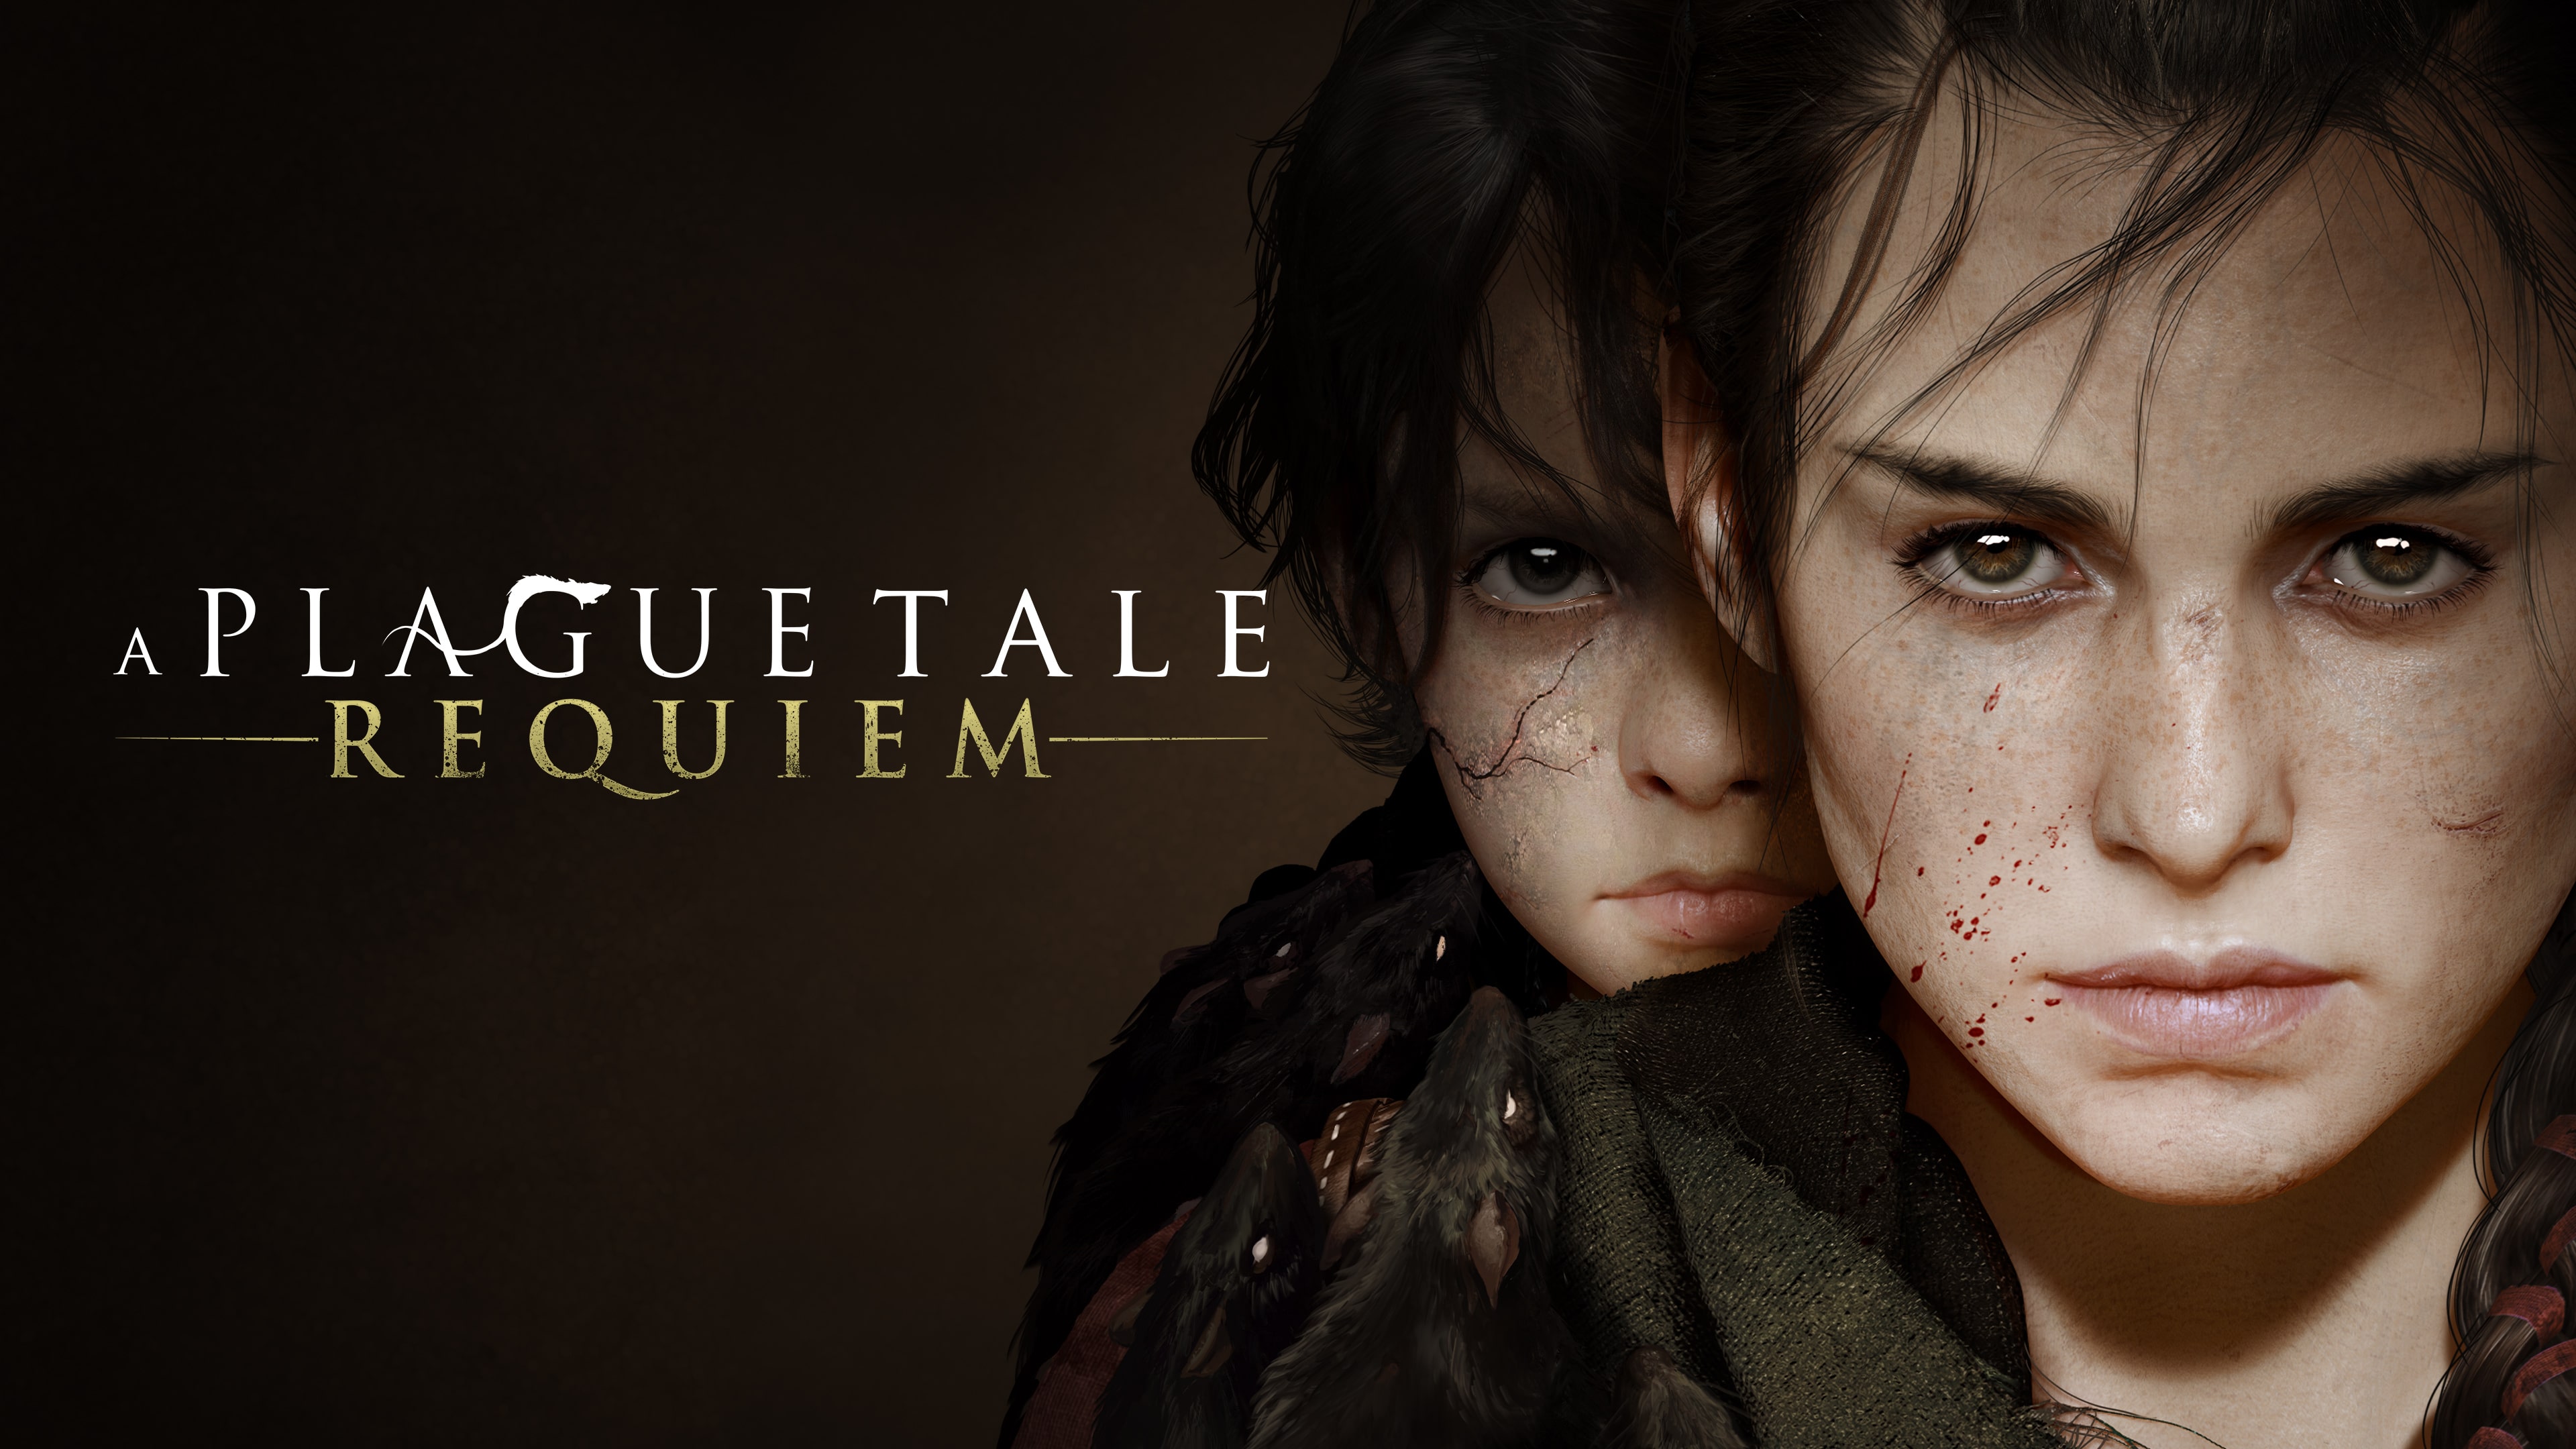 A Plague Tale: Requiem (Simplified Chinese, English, Korean, Japanese, Traditional Chinese)